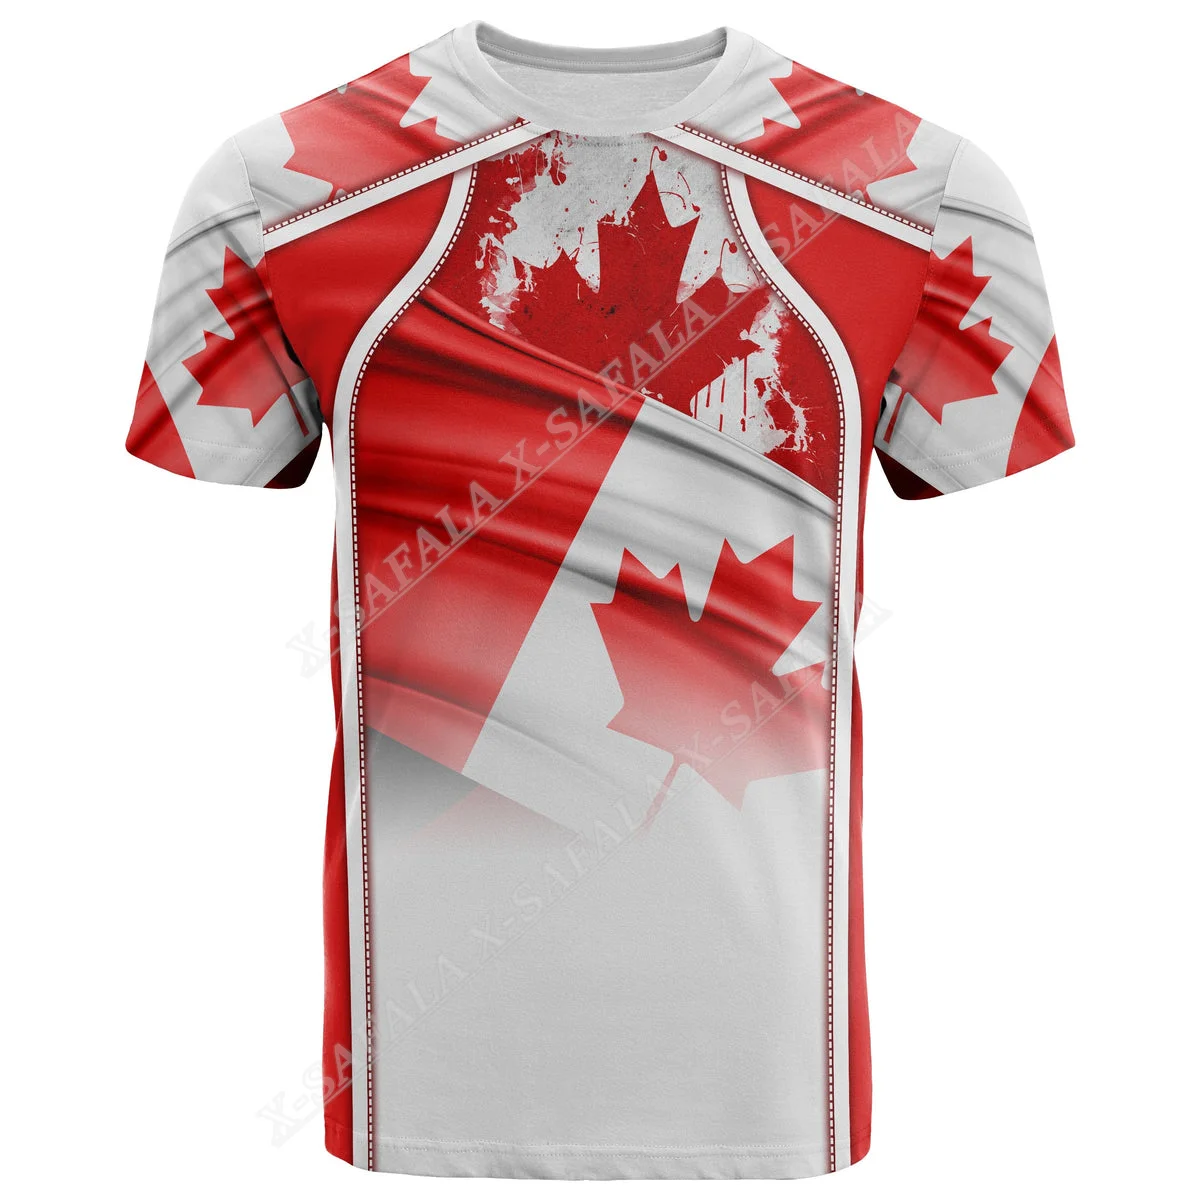 

Canada Day Canadian Flag Emblem Maple Leaf 3D Print T-Shirt Top Summer Tee For Men Streetwear Shorts Sleeve Sport Casual Clothes